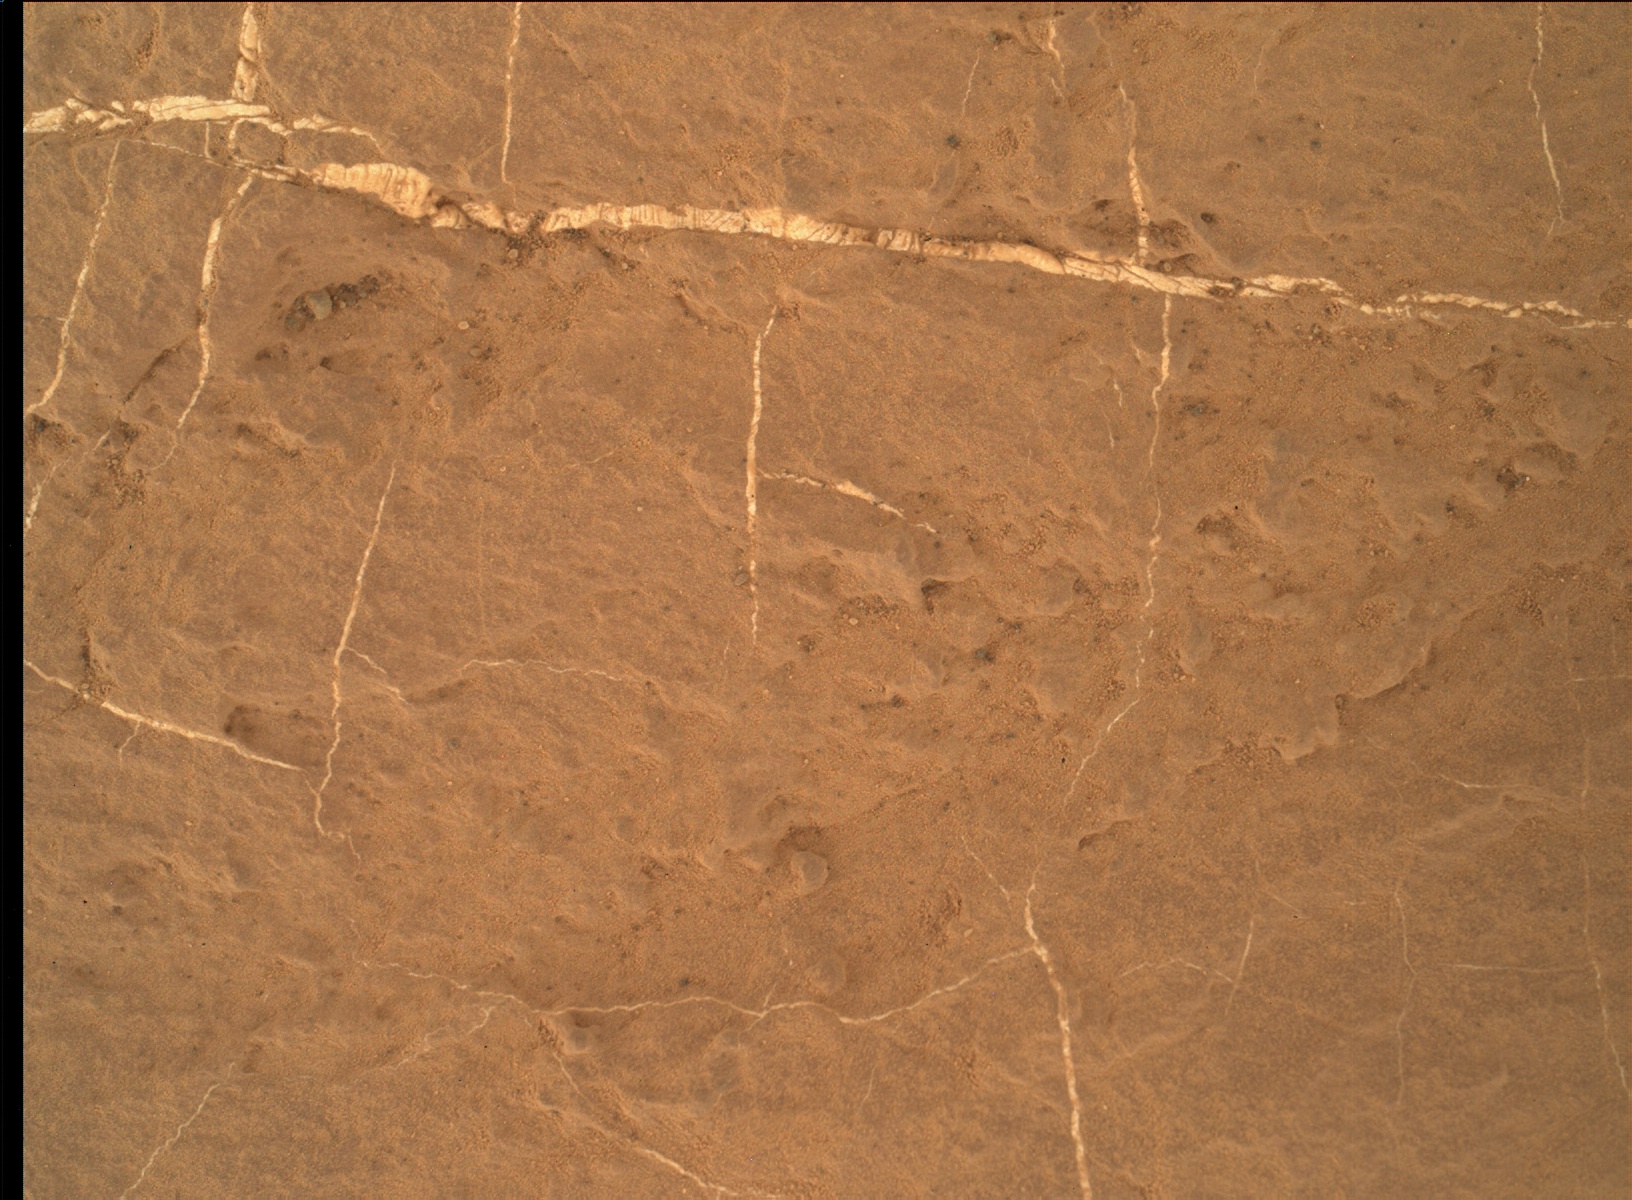 Nasa's Mars rover Curiosity acquired this image using its Mars Hand Lens Imager (MAHLI) on Sol 1484